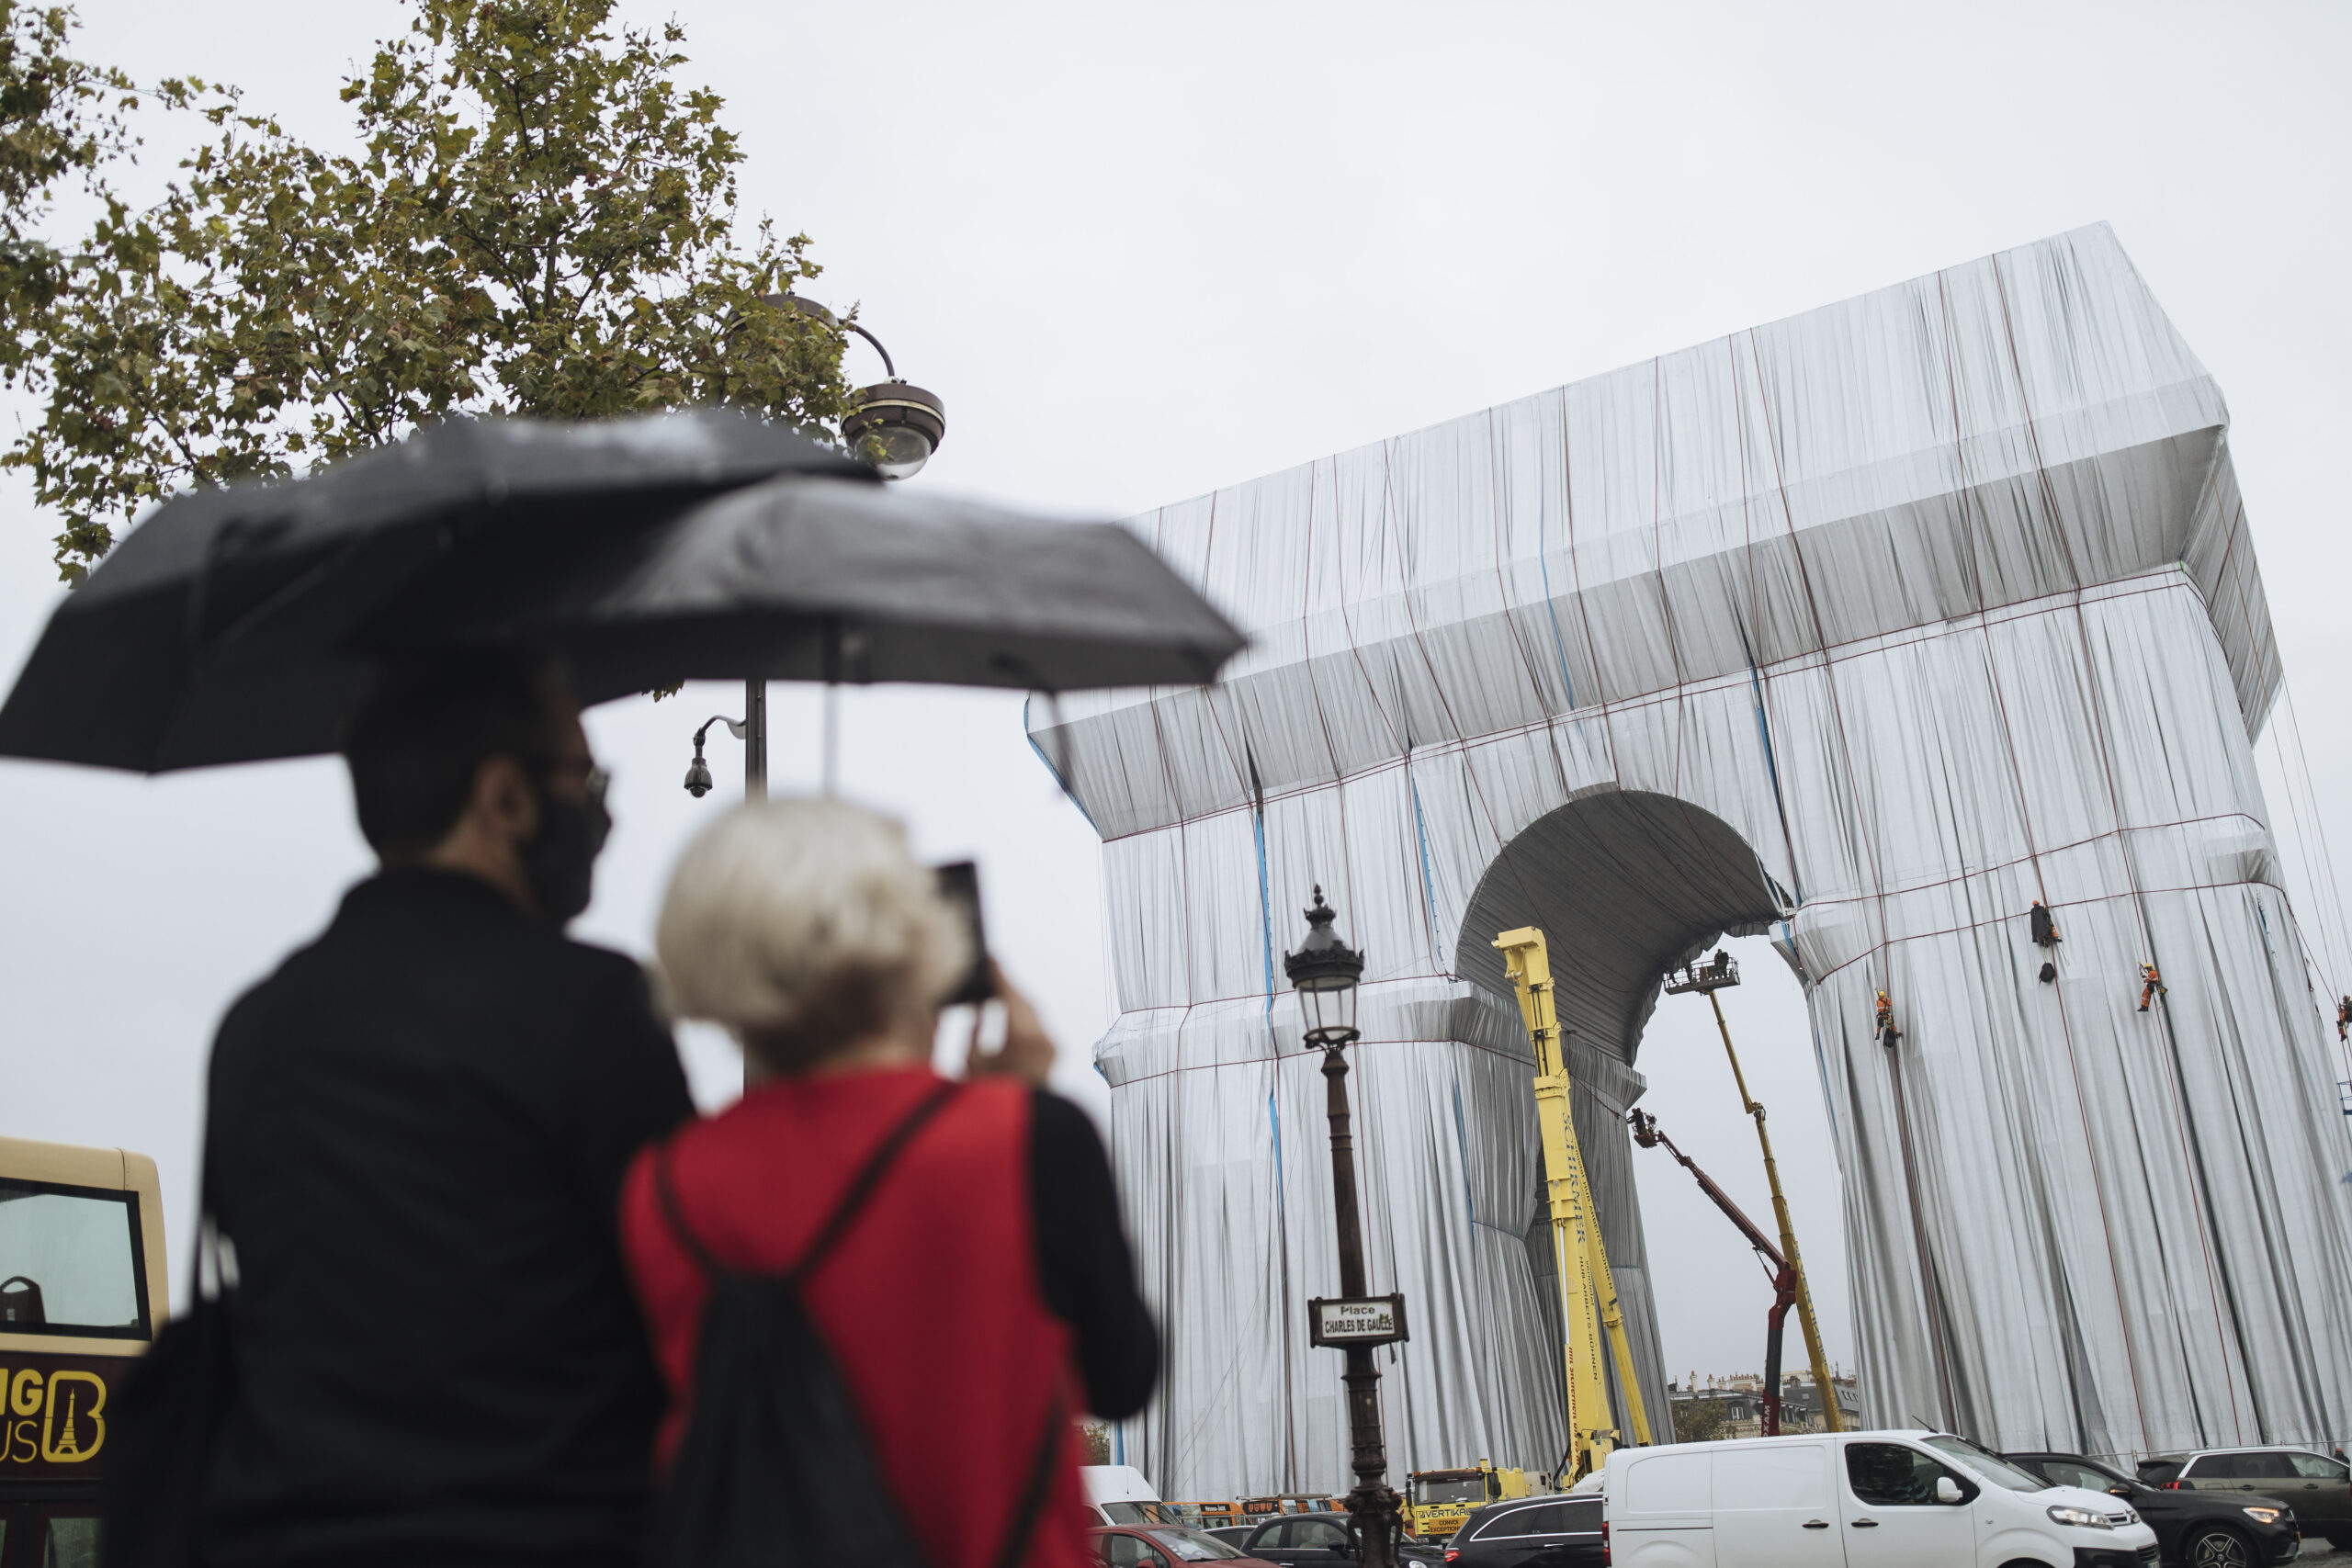 People watch workers wrapping the Arc de Triomphe monument, Wednesday, Sept. 15, 2021 in Paris. The "L'Arc de Triomphe, Wrapped" project by late artist Christo and Jeanne-Claude will be on view from, Sept. 18 to Oct. 3. The famed Paris monument will be wrapped in 25,000 square meters of fabric in silvery blue, and with 3,000 meters of red rope. (AP Photo/Lewis Joly)